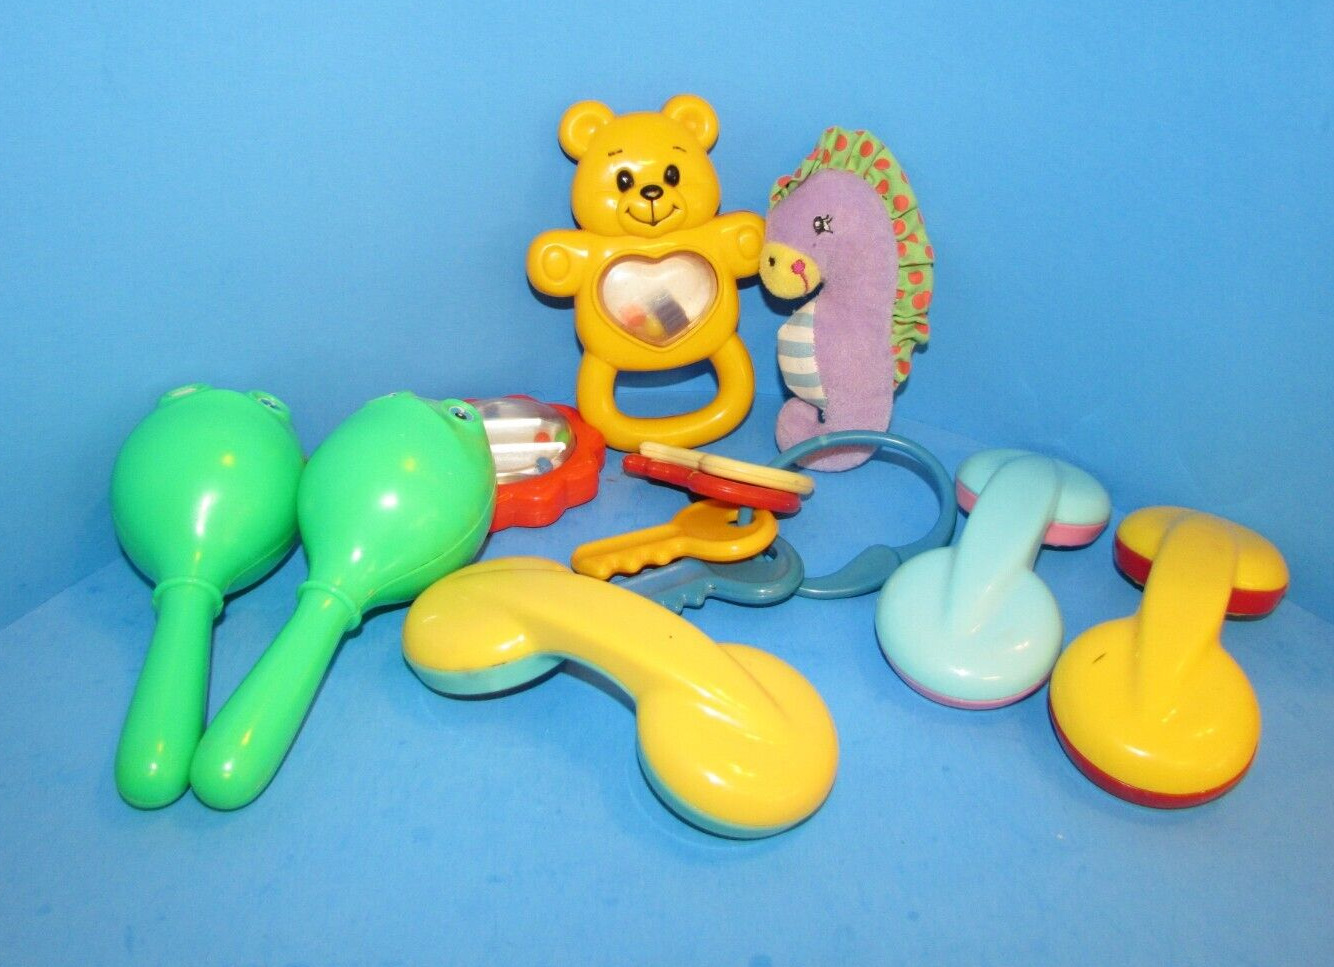 Mixed Baby Toy Lot: Rattles, Teethers, Shakers & Plush